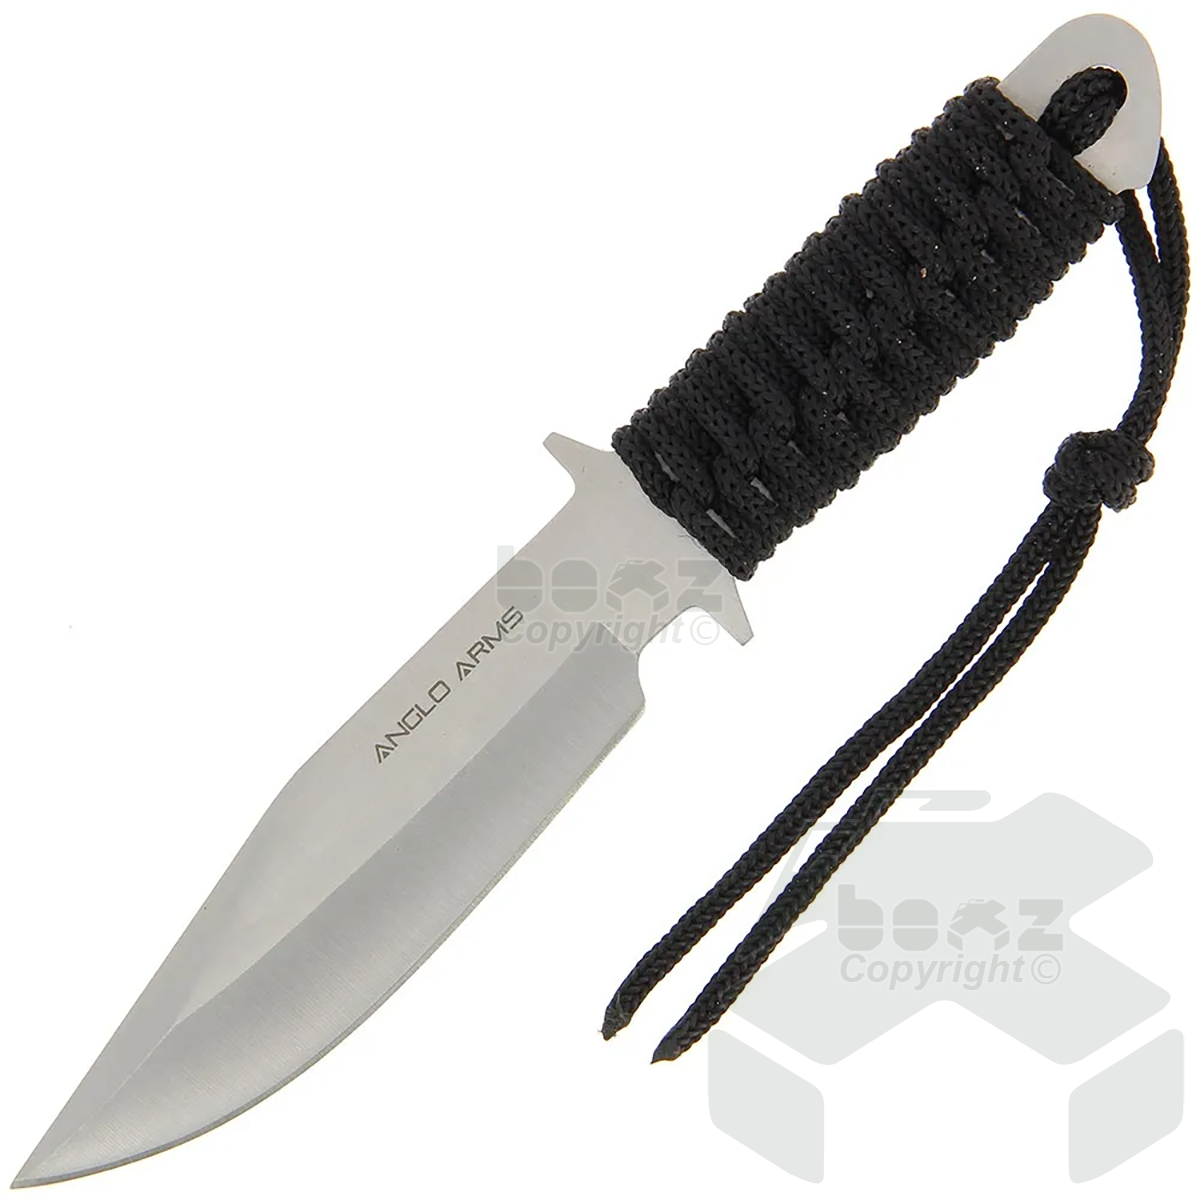 Anglo Arms Fixed Blade Knife 081 - Black Laced Knife with Sheath (081)